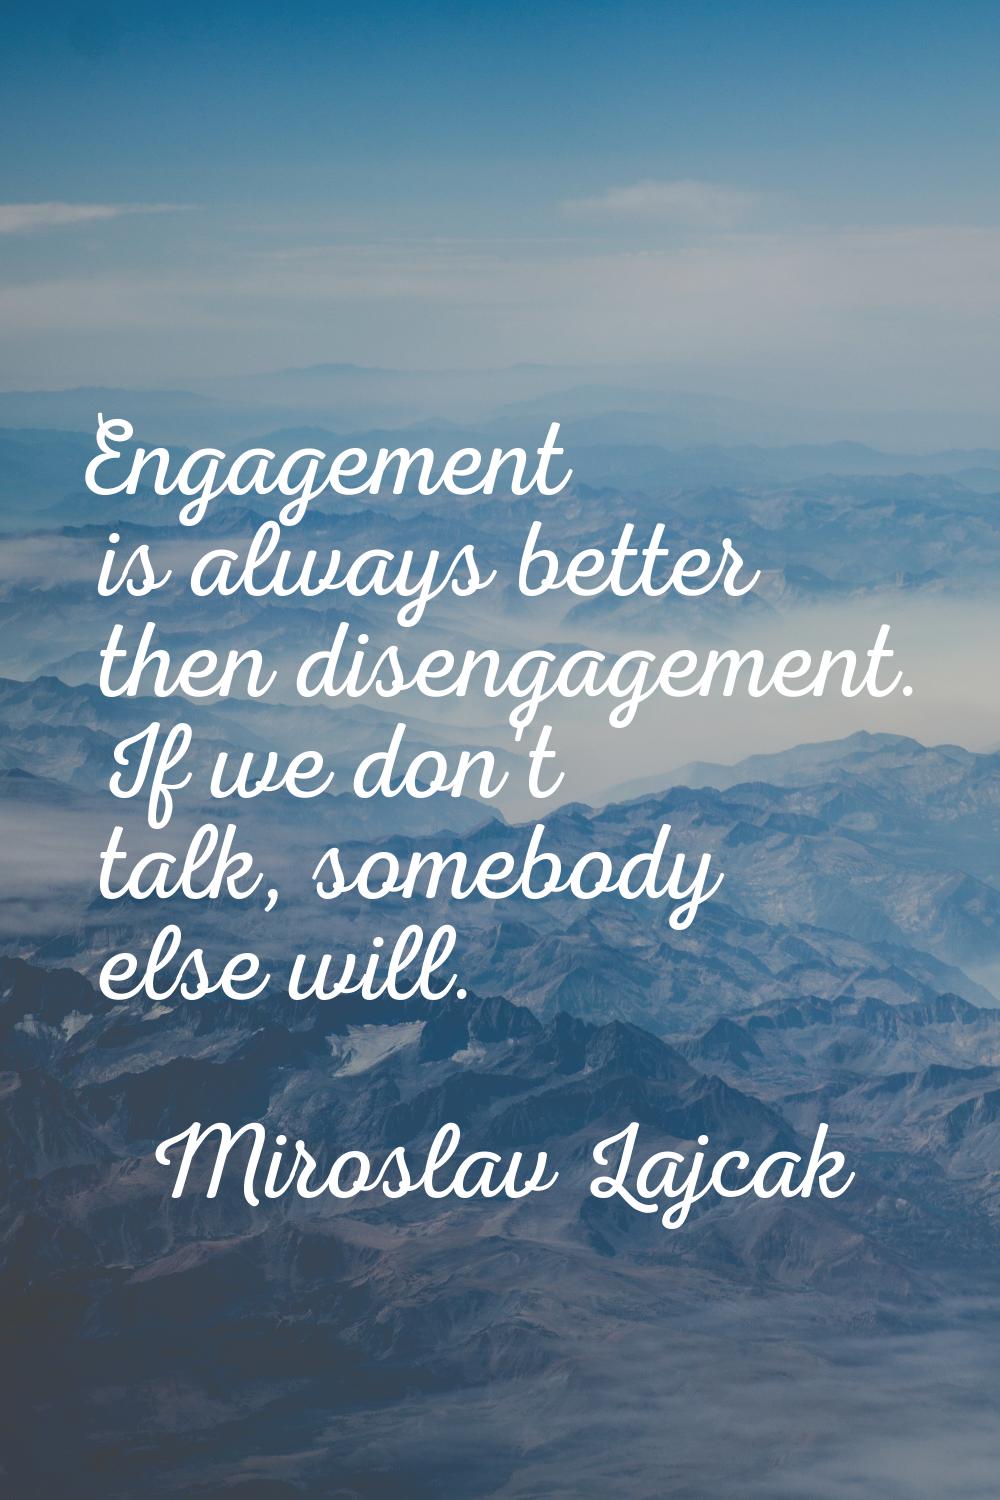 Engagement is always better then disengagement. If we don't talk, somebody else will.